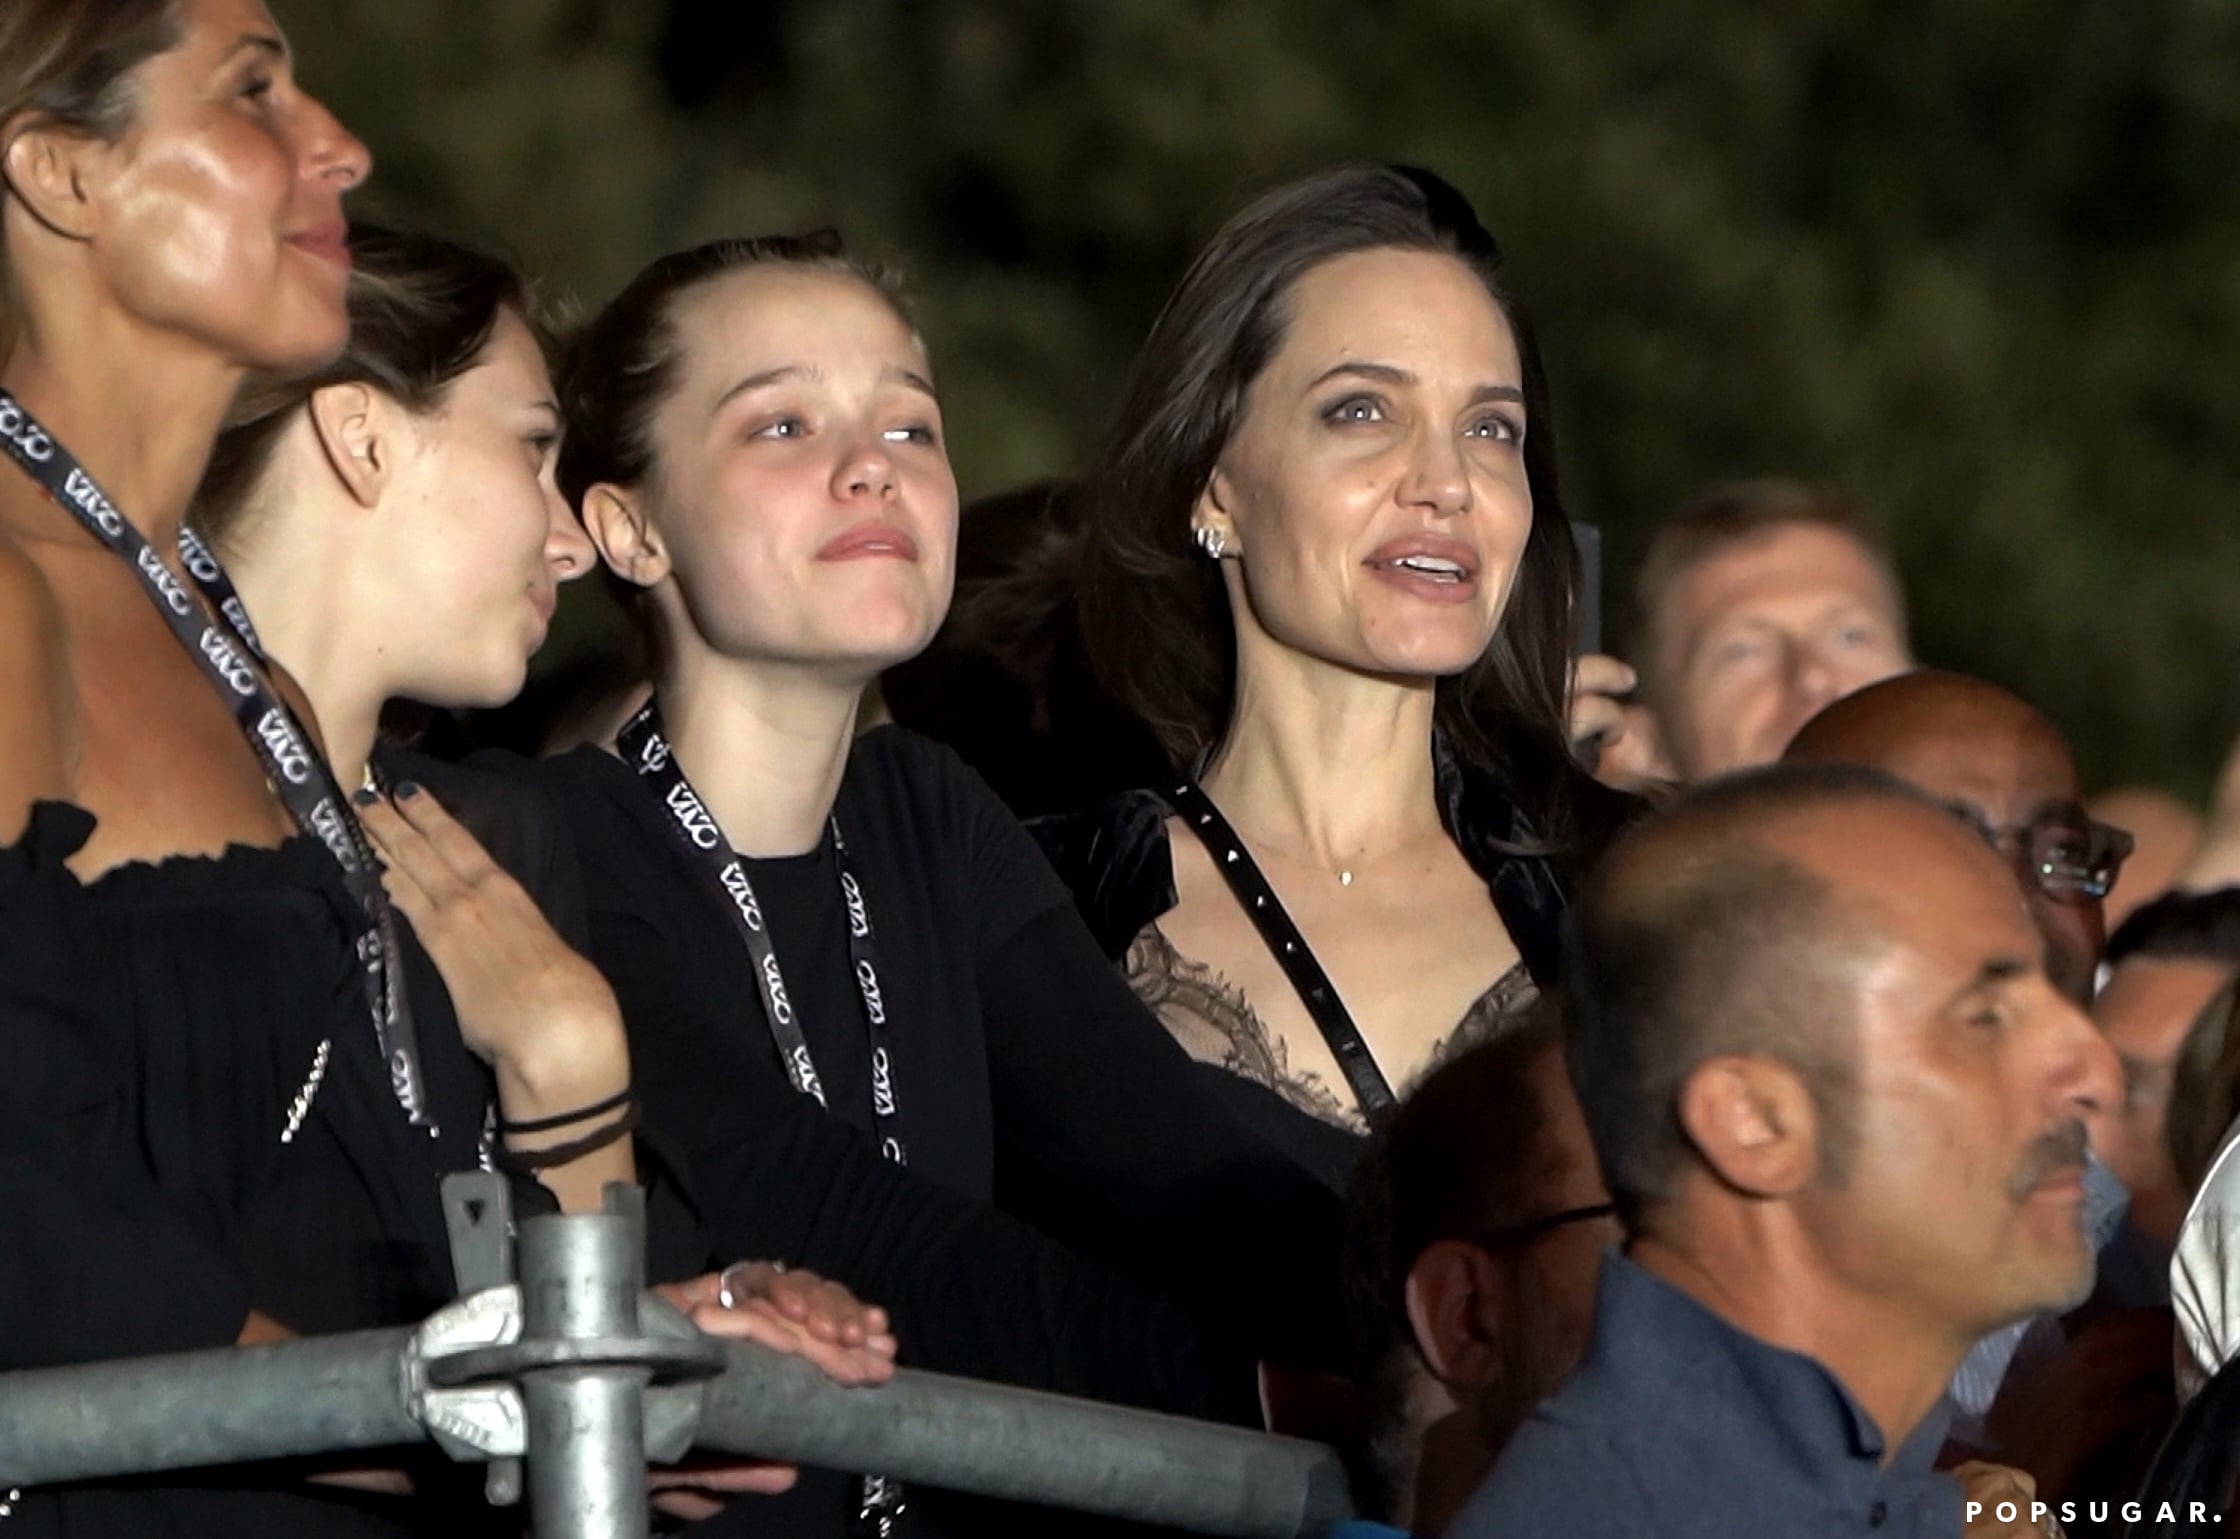 Angelina Jolie and Daughter Shiloh Rock Out at Concert in Rome